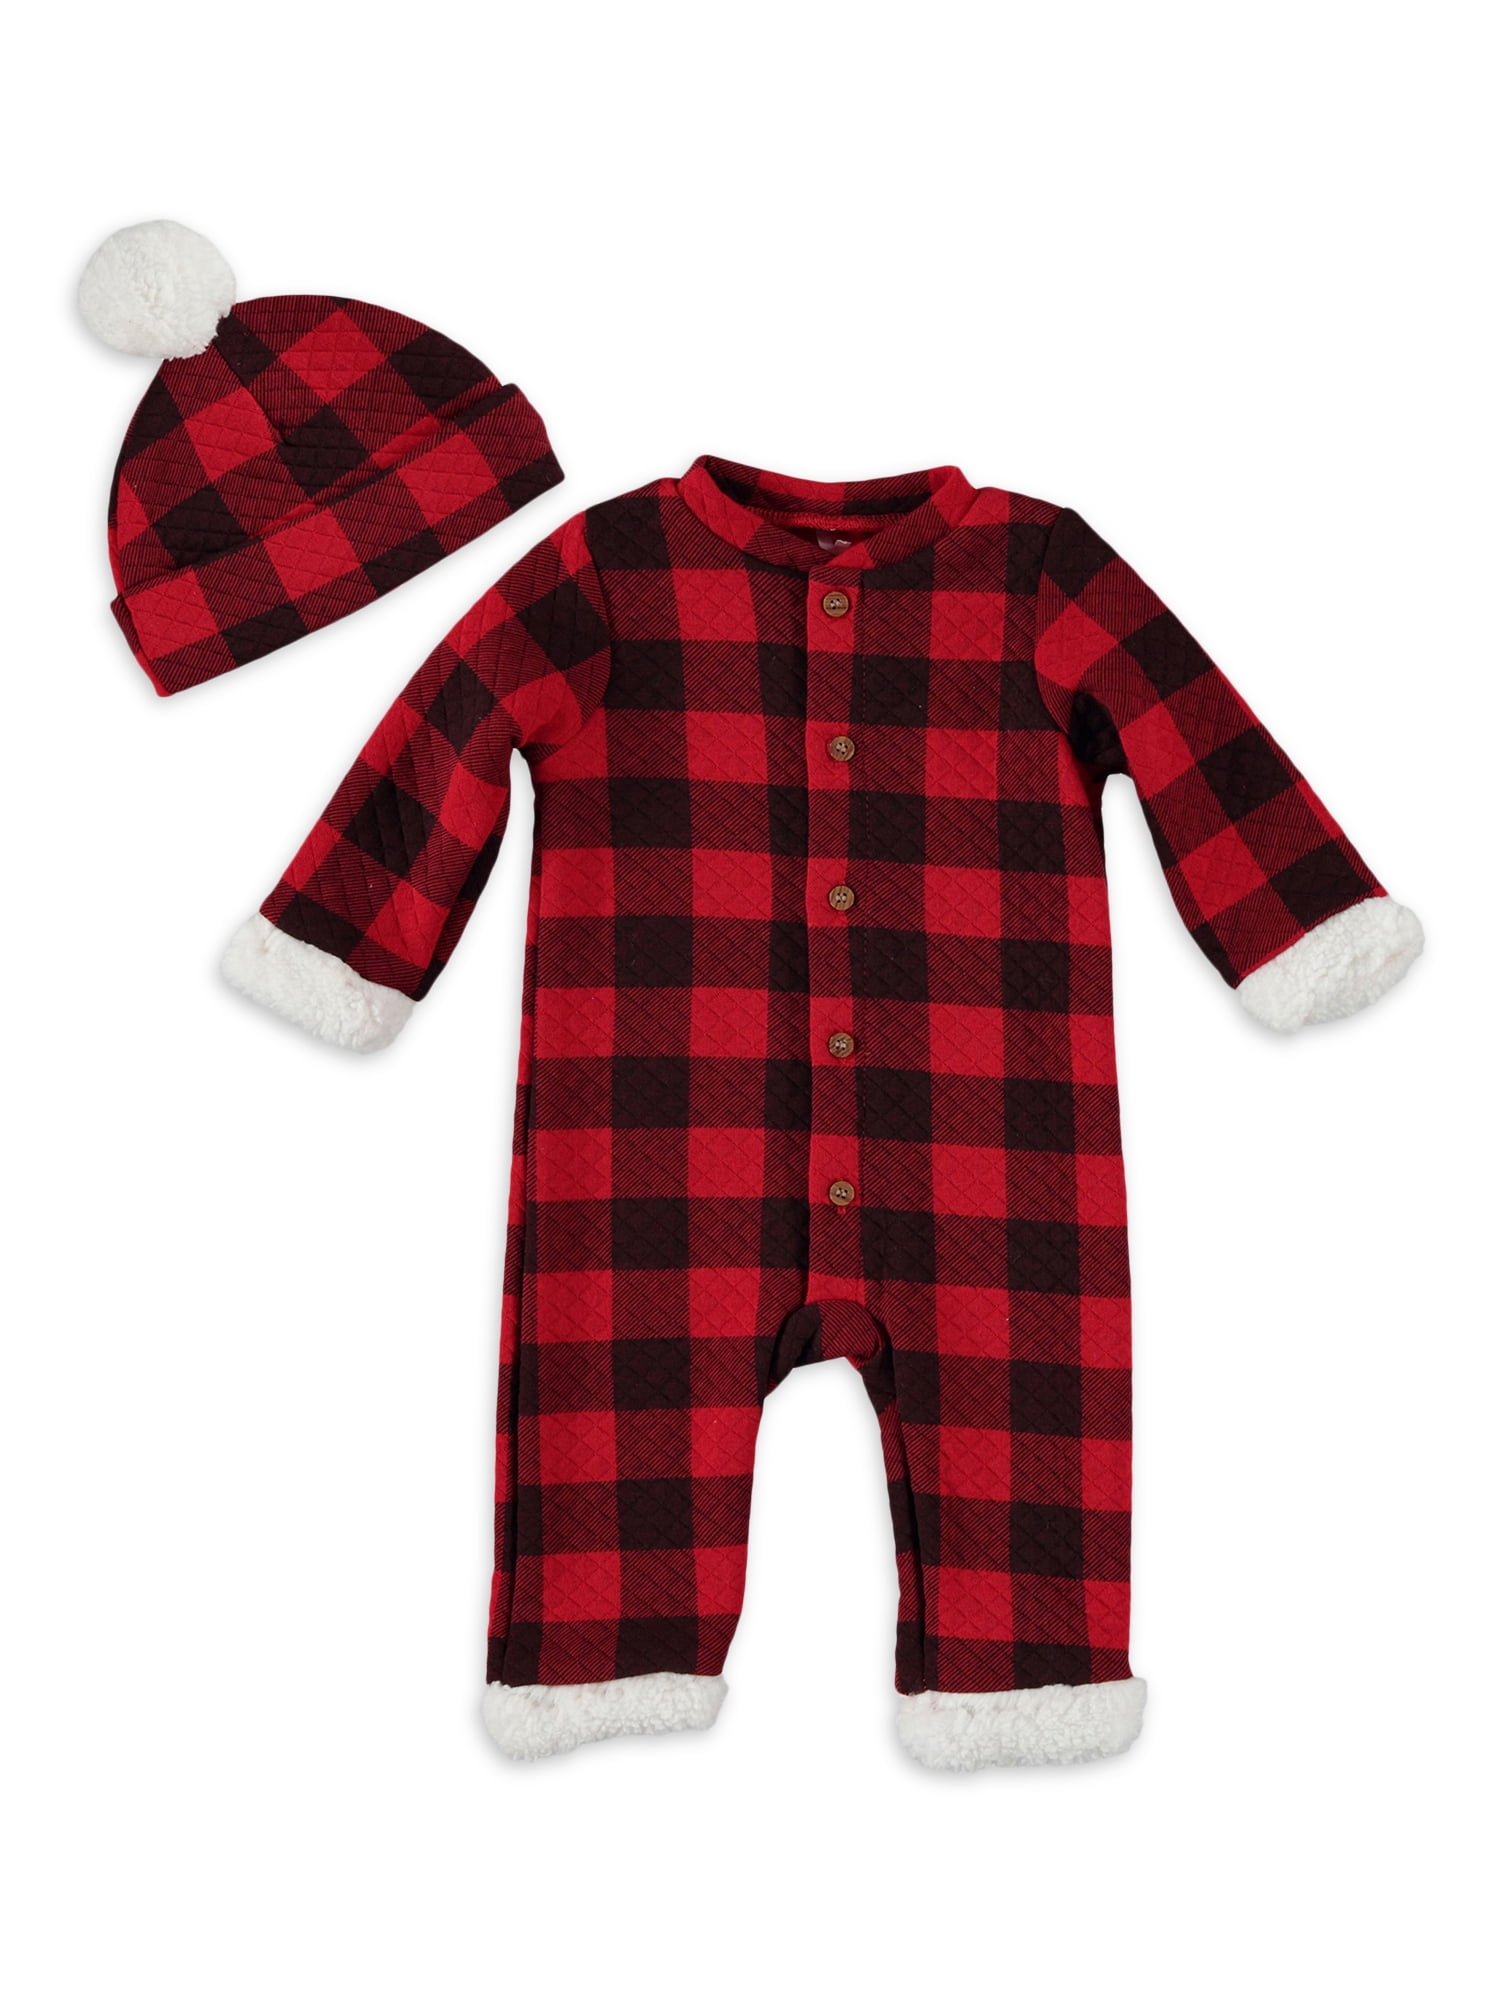 New Blue Plaid Baby boy or girl Light weight fabric Romper size 12-18 months 